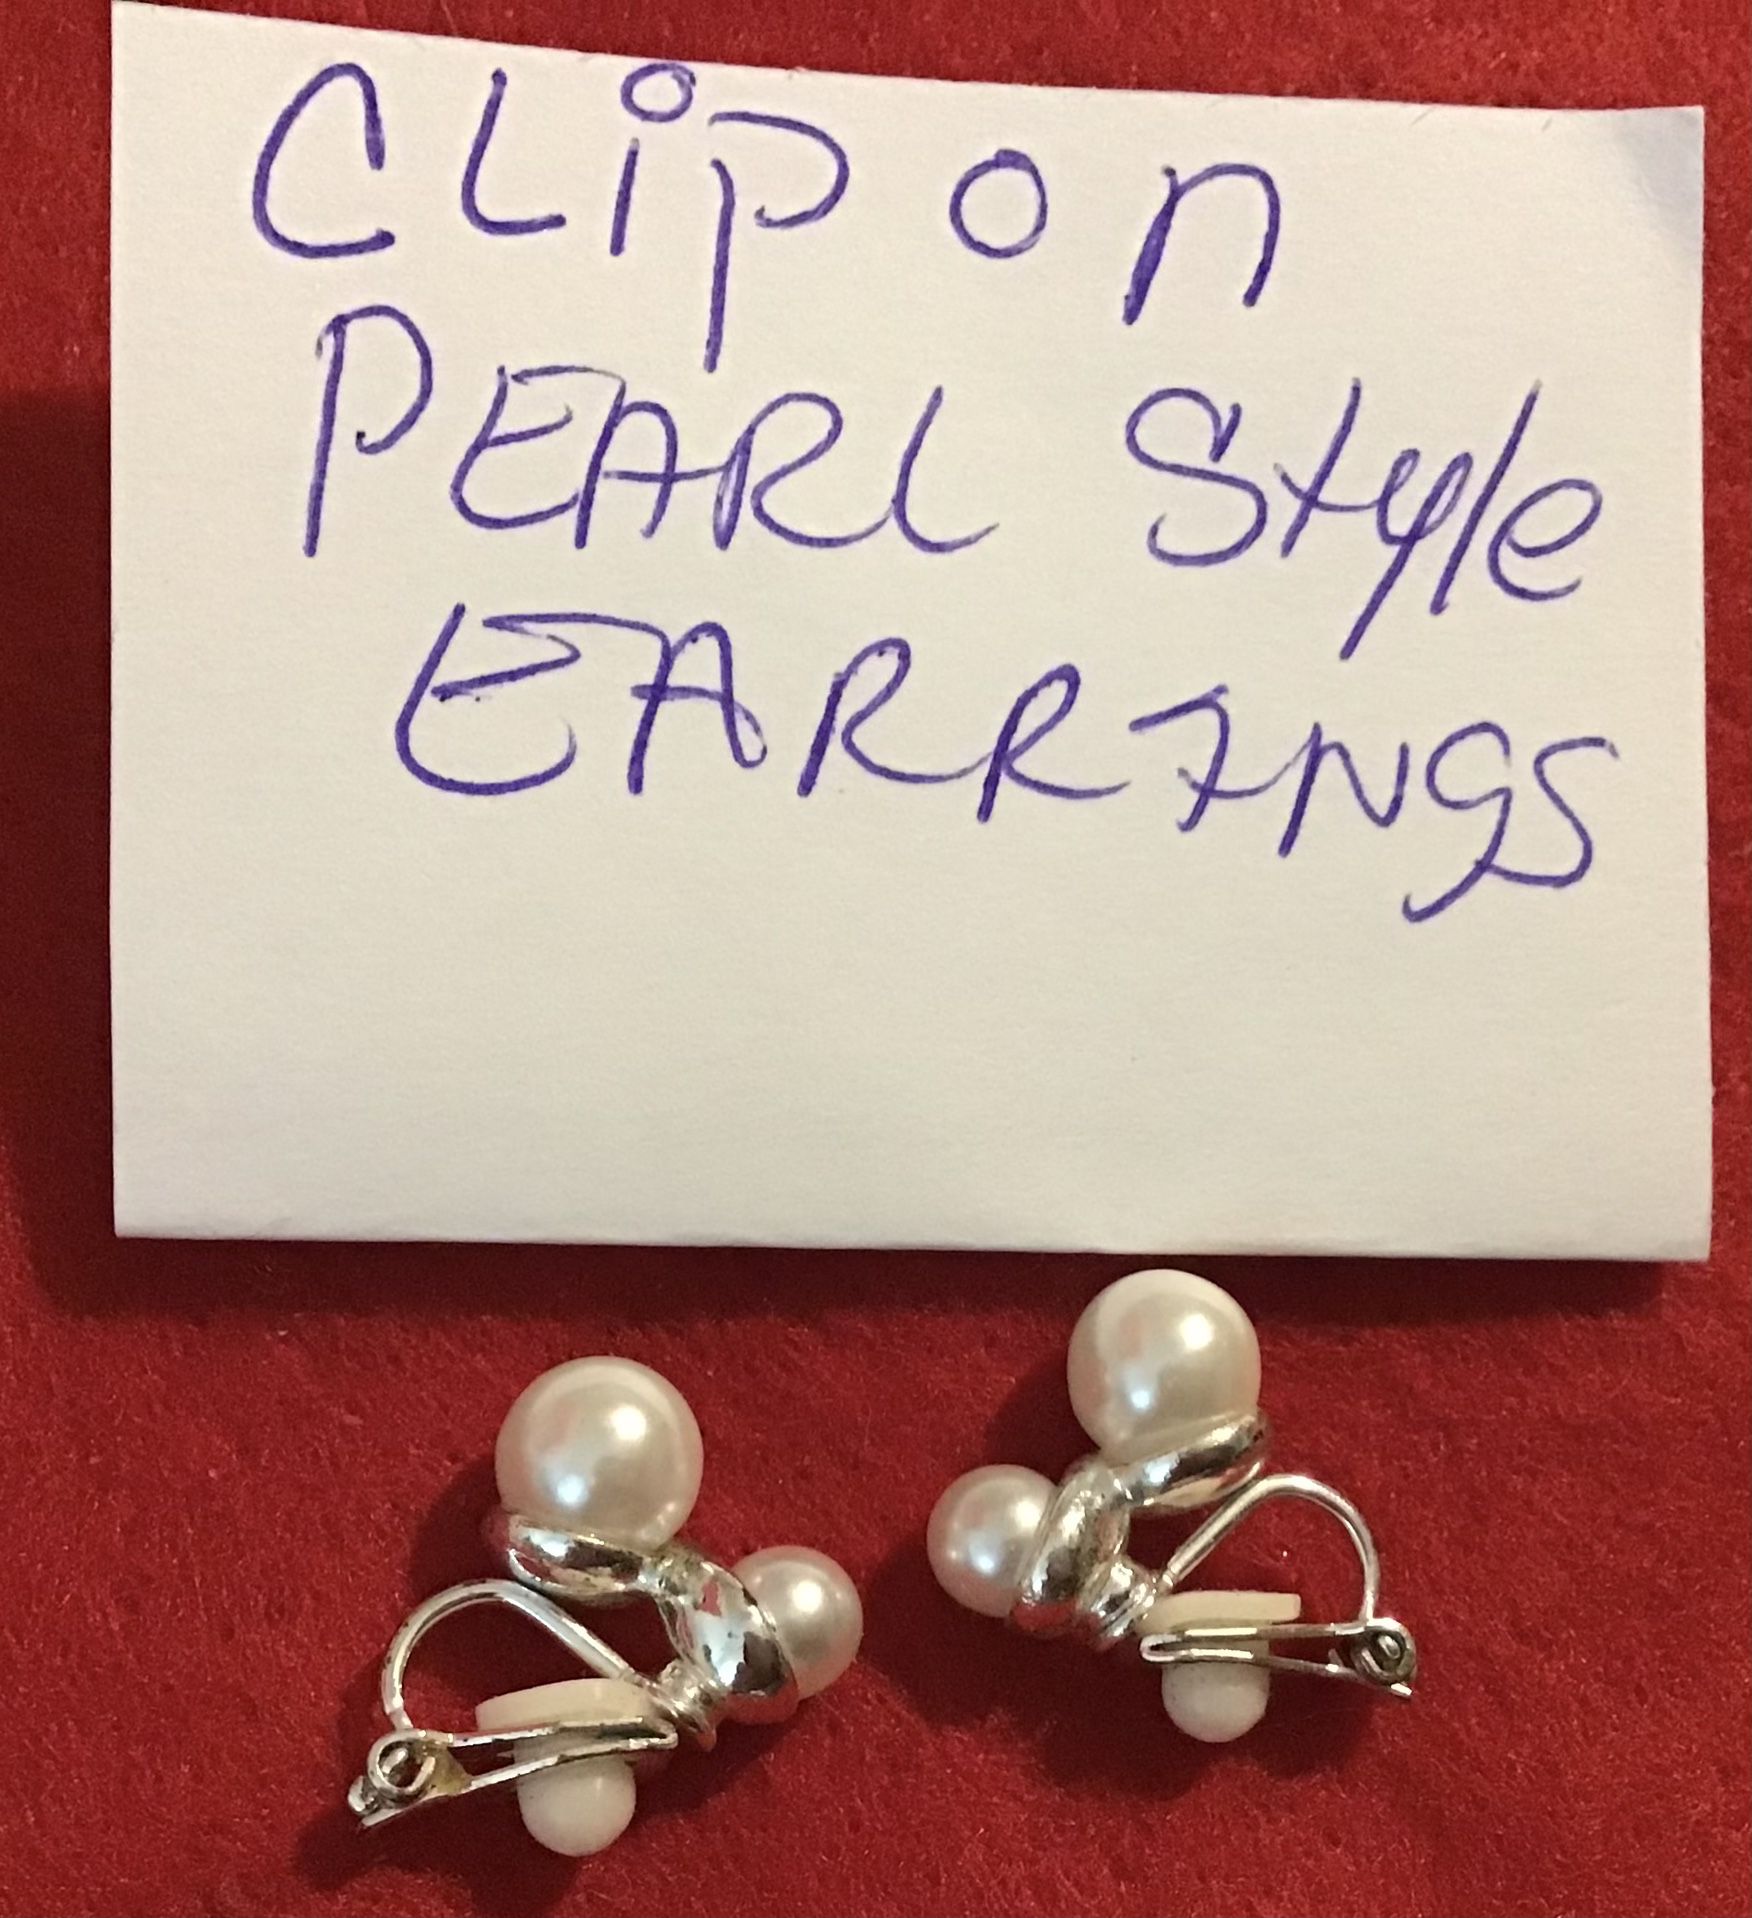 Clip-on Pearl Style Fashion Earrings 